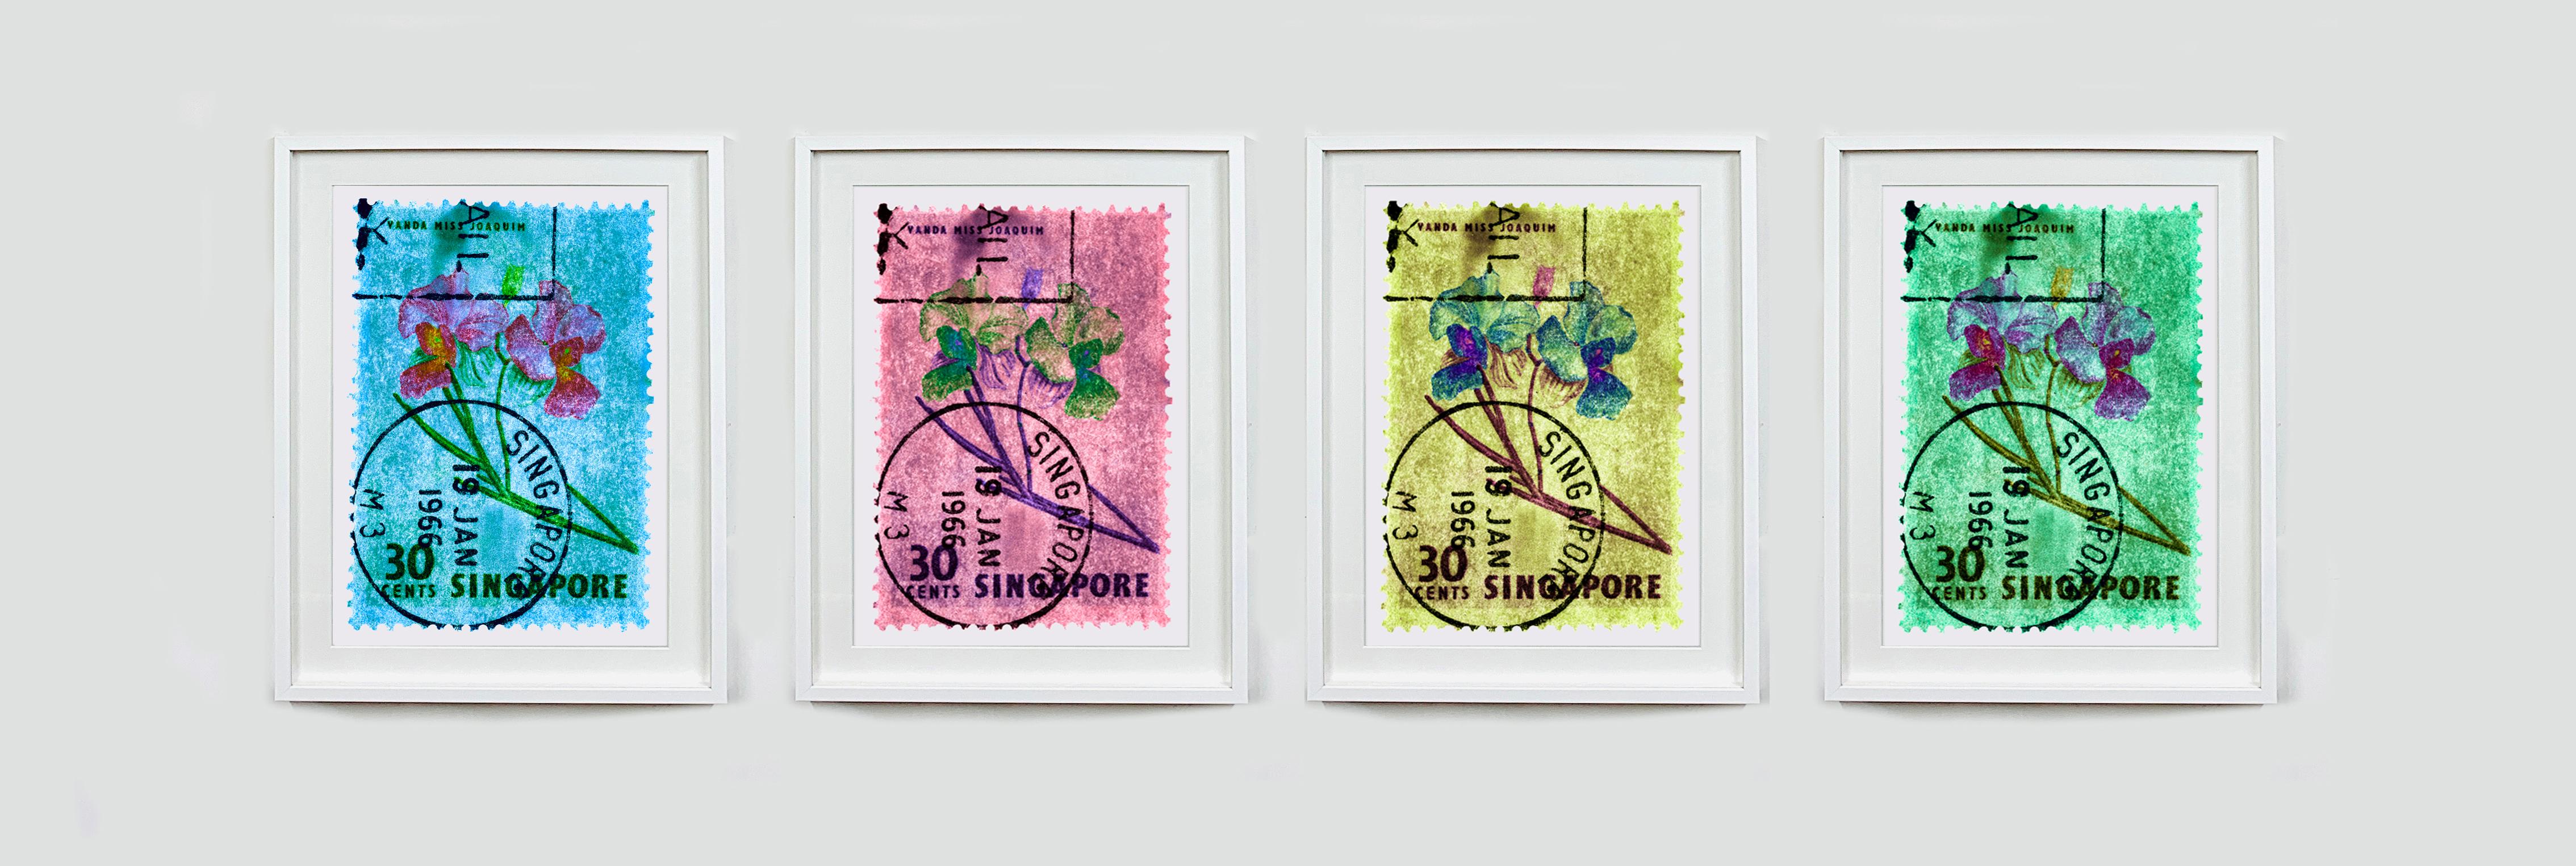 Singapore Stamp Collection, 30c Singapore Orchid Blue - Floral color photo - Conceptual Print by Heidler & Heeps